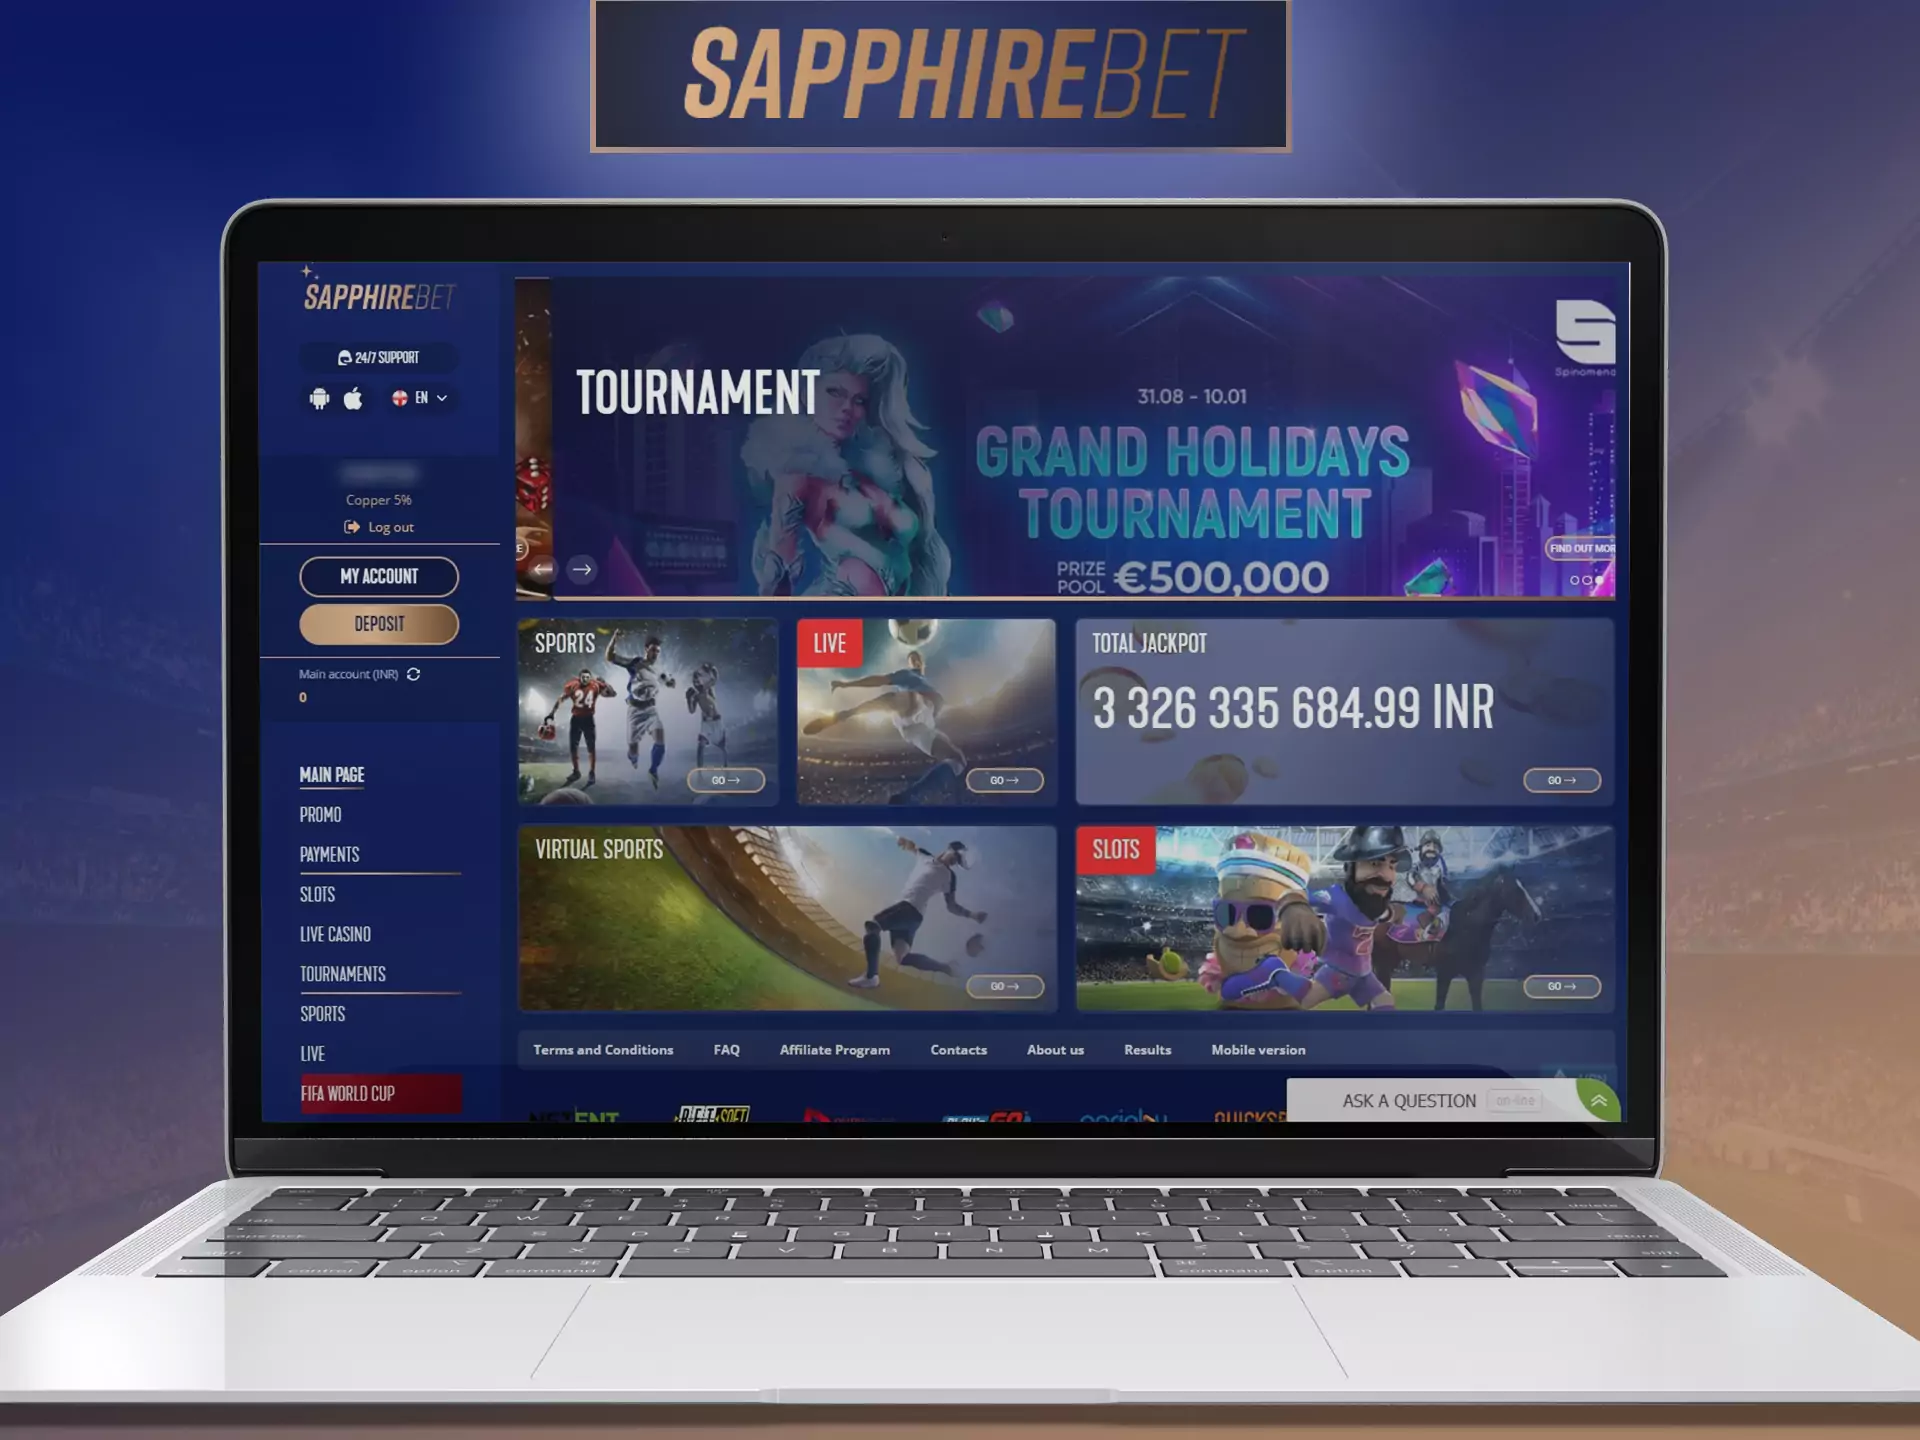 Use Sapphirebet, place bets and play at the casino on your personal computer.